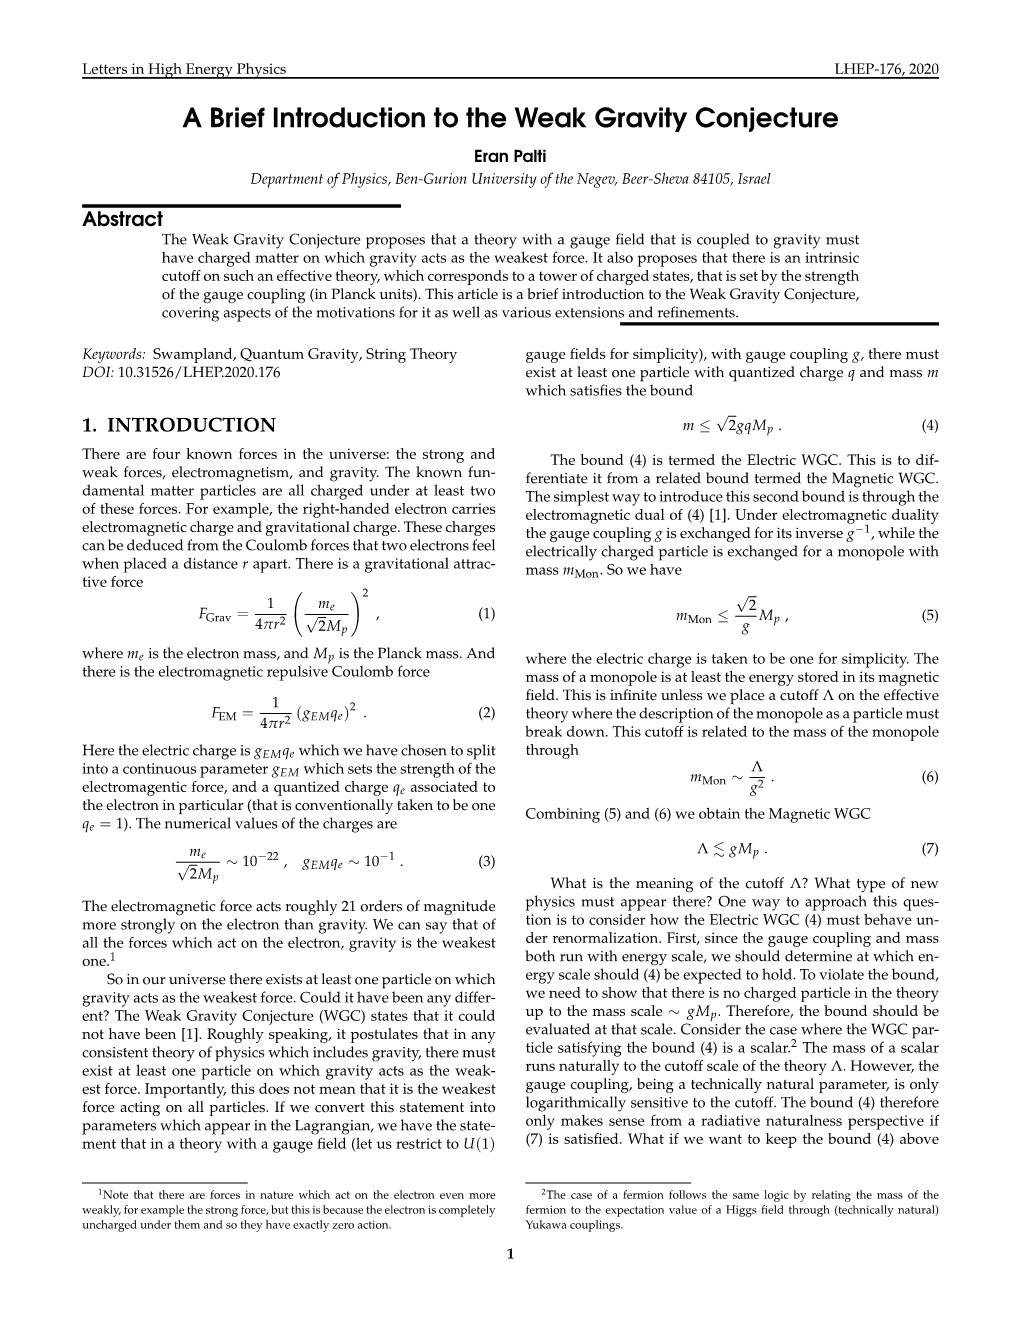 A Brief Introduction to the Weak Gravity Conjecture Eran Palti Department of Physics, Ben-Gurion University of the Negev, Beer-Sheva 84105, Israel